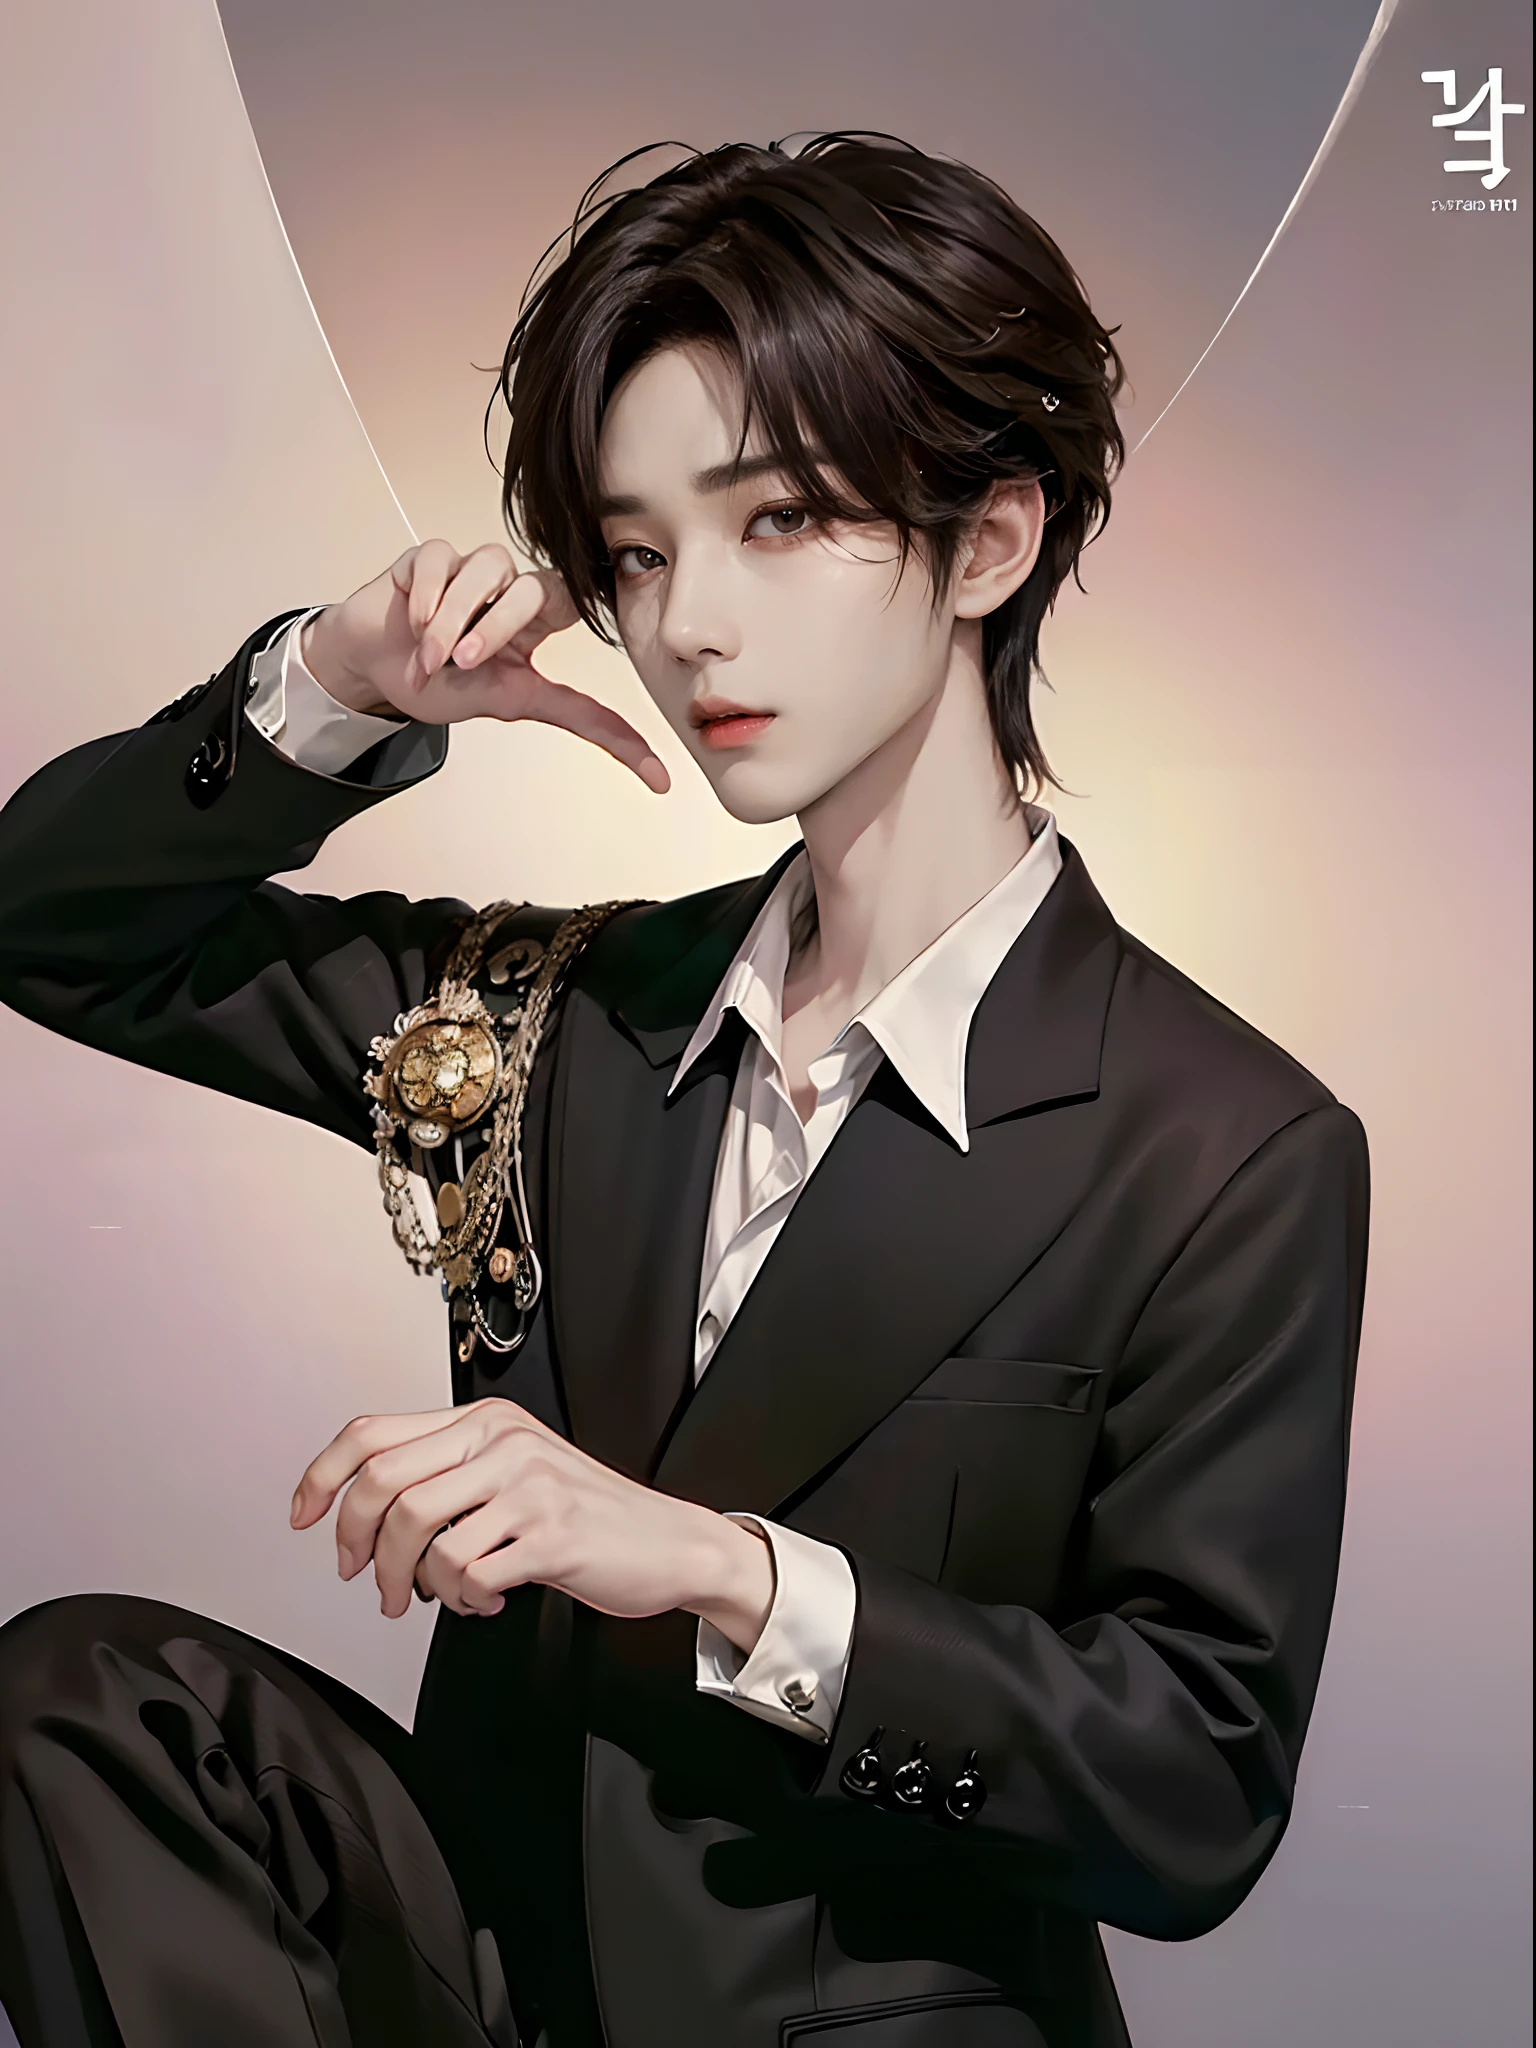 ((4K works))、​masterpiece、（top-quality)、((high-level image quality))、One Manly Boy、Slim body、((Dressed in a black tuxedo))、(Detailed beautiful eyeodel Magazines))、Face similar to Chaewon in Ruseraphim、((short hair above the ears))、((Smaller face))、((Neutral face))、((Light brown eyes))、((Korean boy))、((18year old))、((Handsome man))、((A charming expression))、((Korean Makeup))、((elongated and sharp eyes))、((Photographed so that the whole body can be seen))、((Focus zoom out))、((Model Magazine Cover))、((model poseodel photo))、Professional Photoagazine covers))